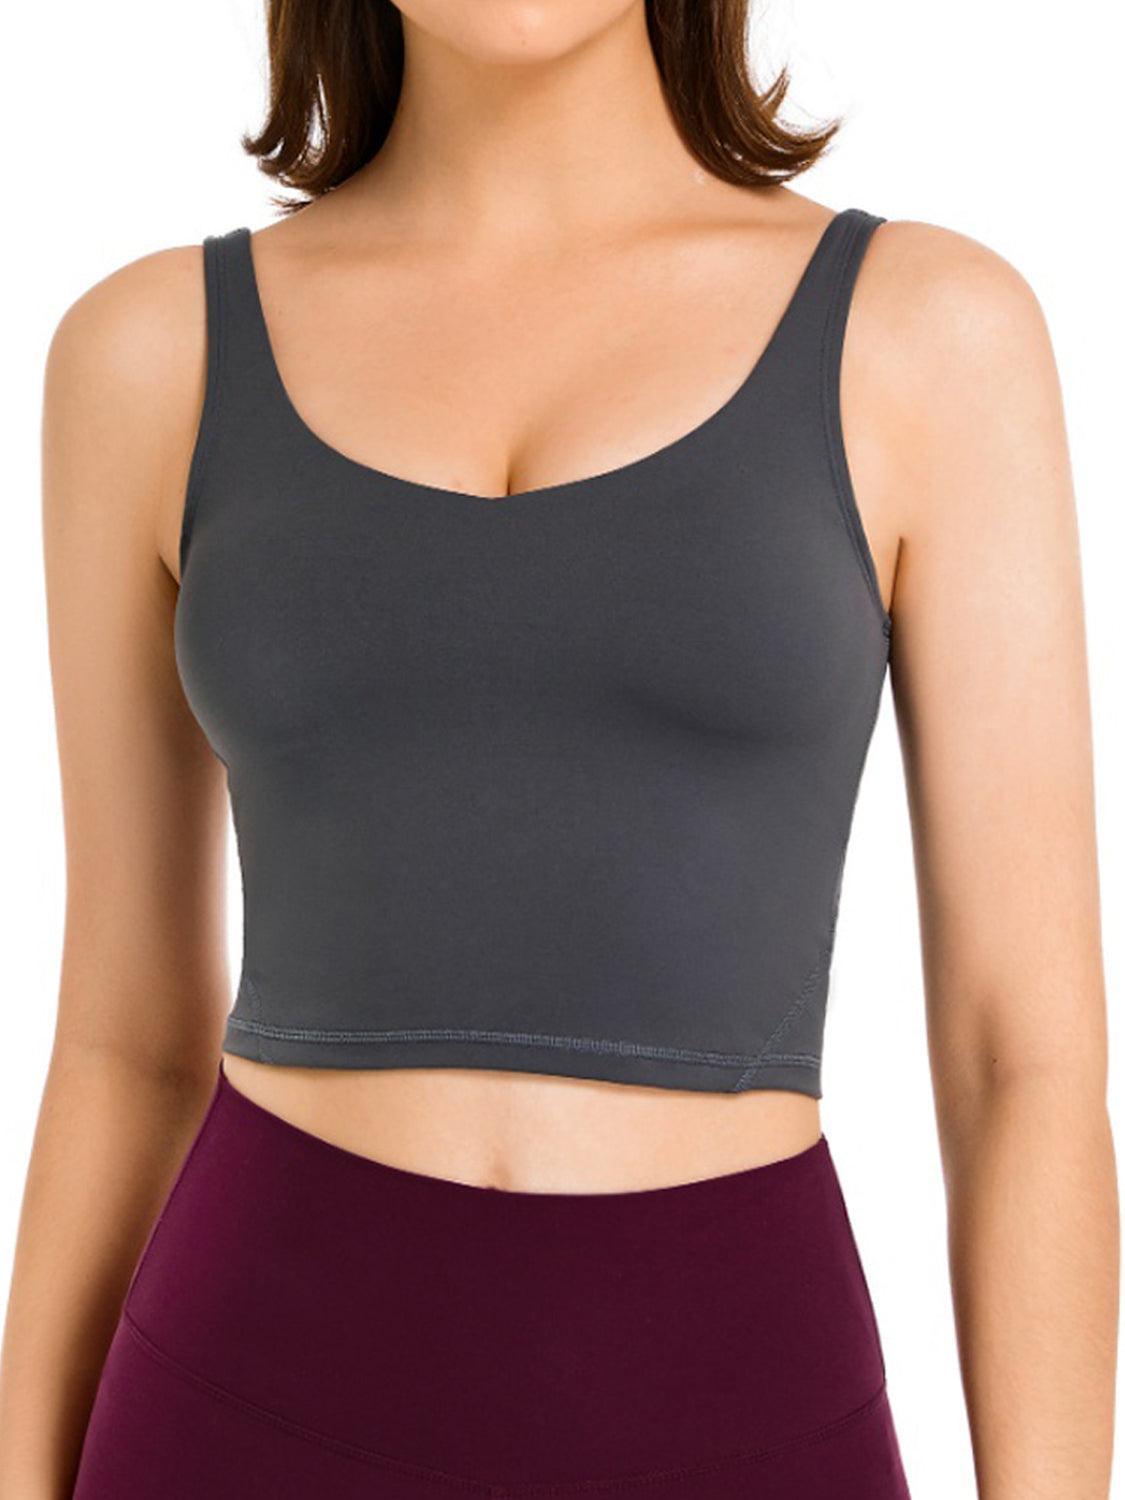 a woman wearing a gray crop top and maroon skirt